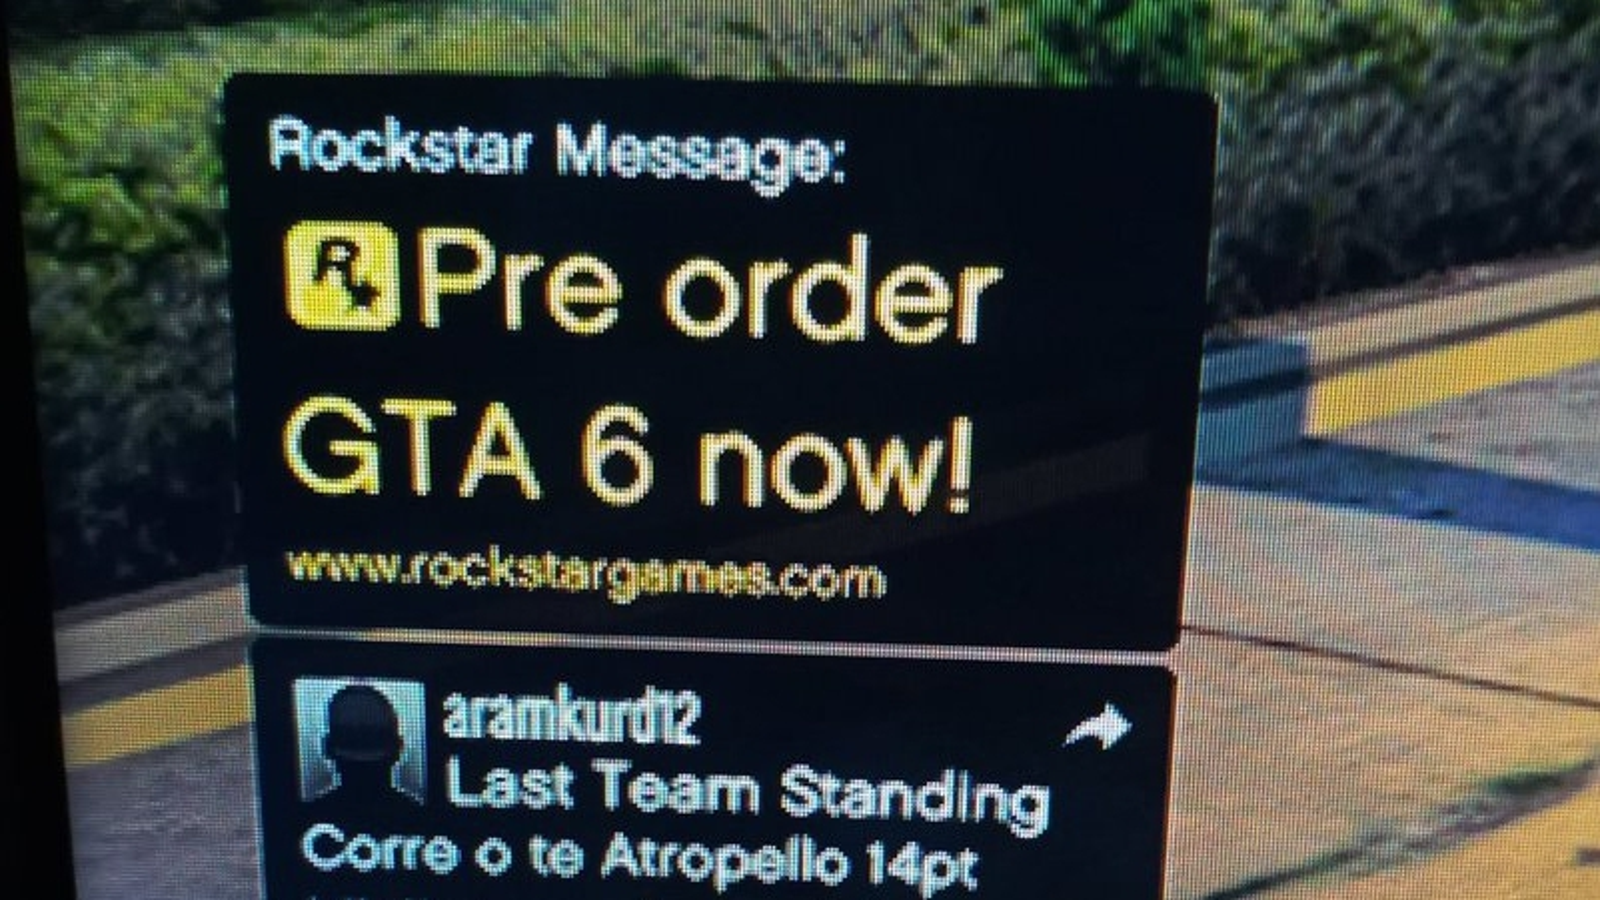 GTA 6 listed for 2020 release by retailer Gameware, probably fake